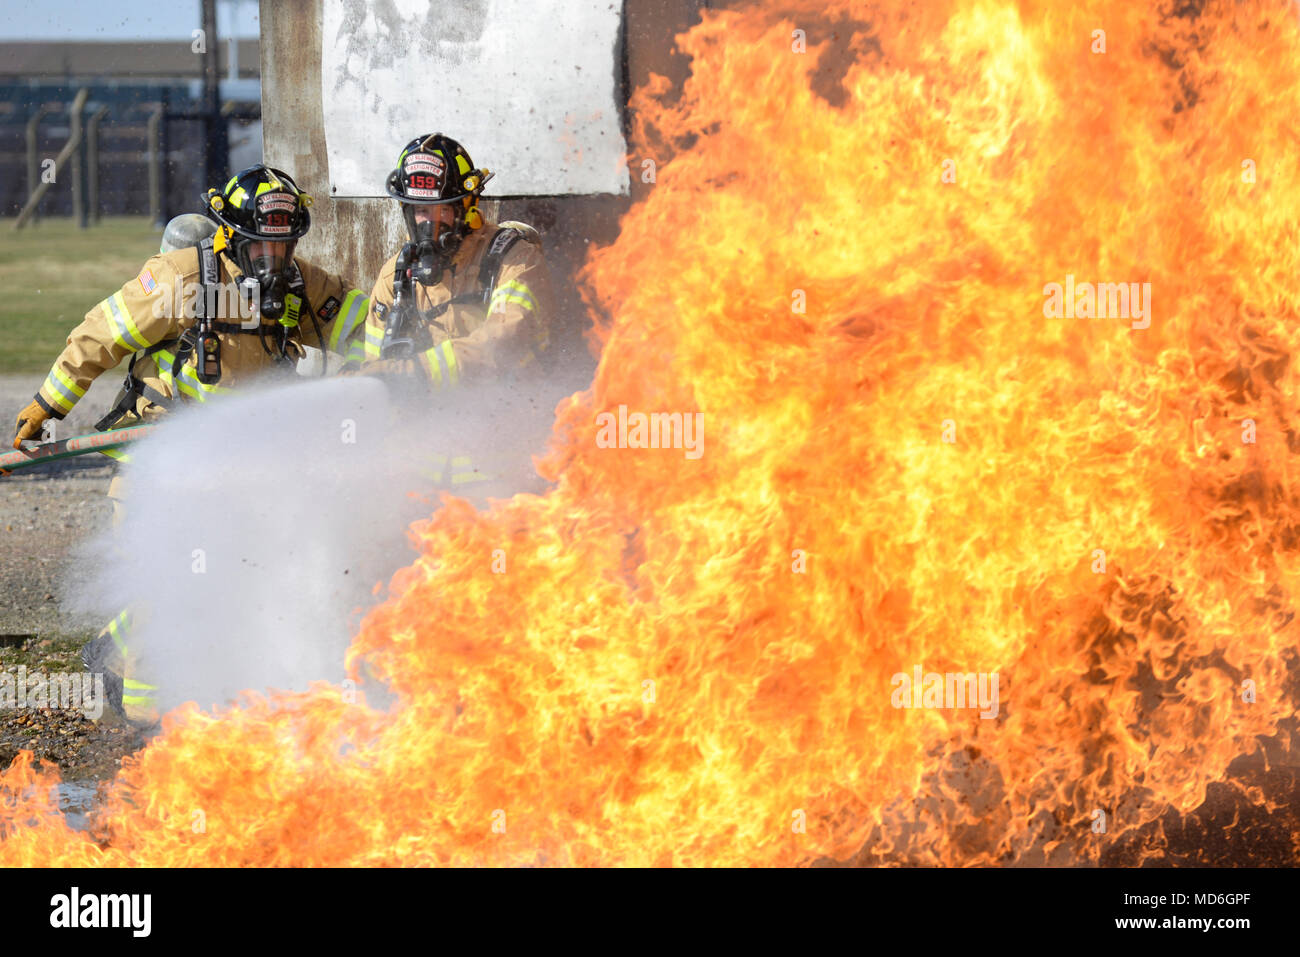 Daniel Manning and Stephen Cooper, 100th Civil Engineer Squadron firefighters, extinguish an aircraft fire as part of annual proficiency skill training for firefighters at their training burn pit on RAF Mildenhall, England, March 21, 2018. These exercises provide training and keep fire team members prepared with the techniques needed to control an aircraft fire. (U.S. Air Force photo by Tech. Sgt. Emerson Nuñez) Stock Photo